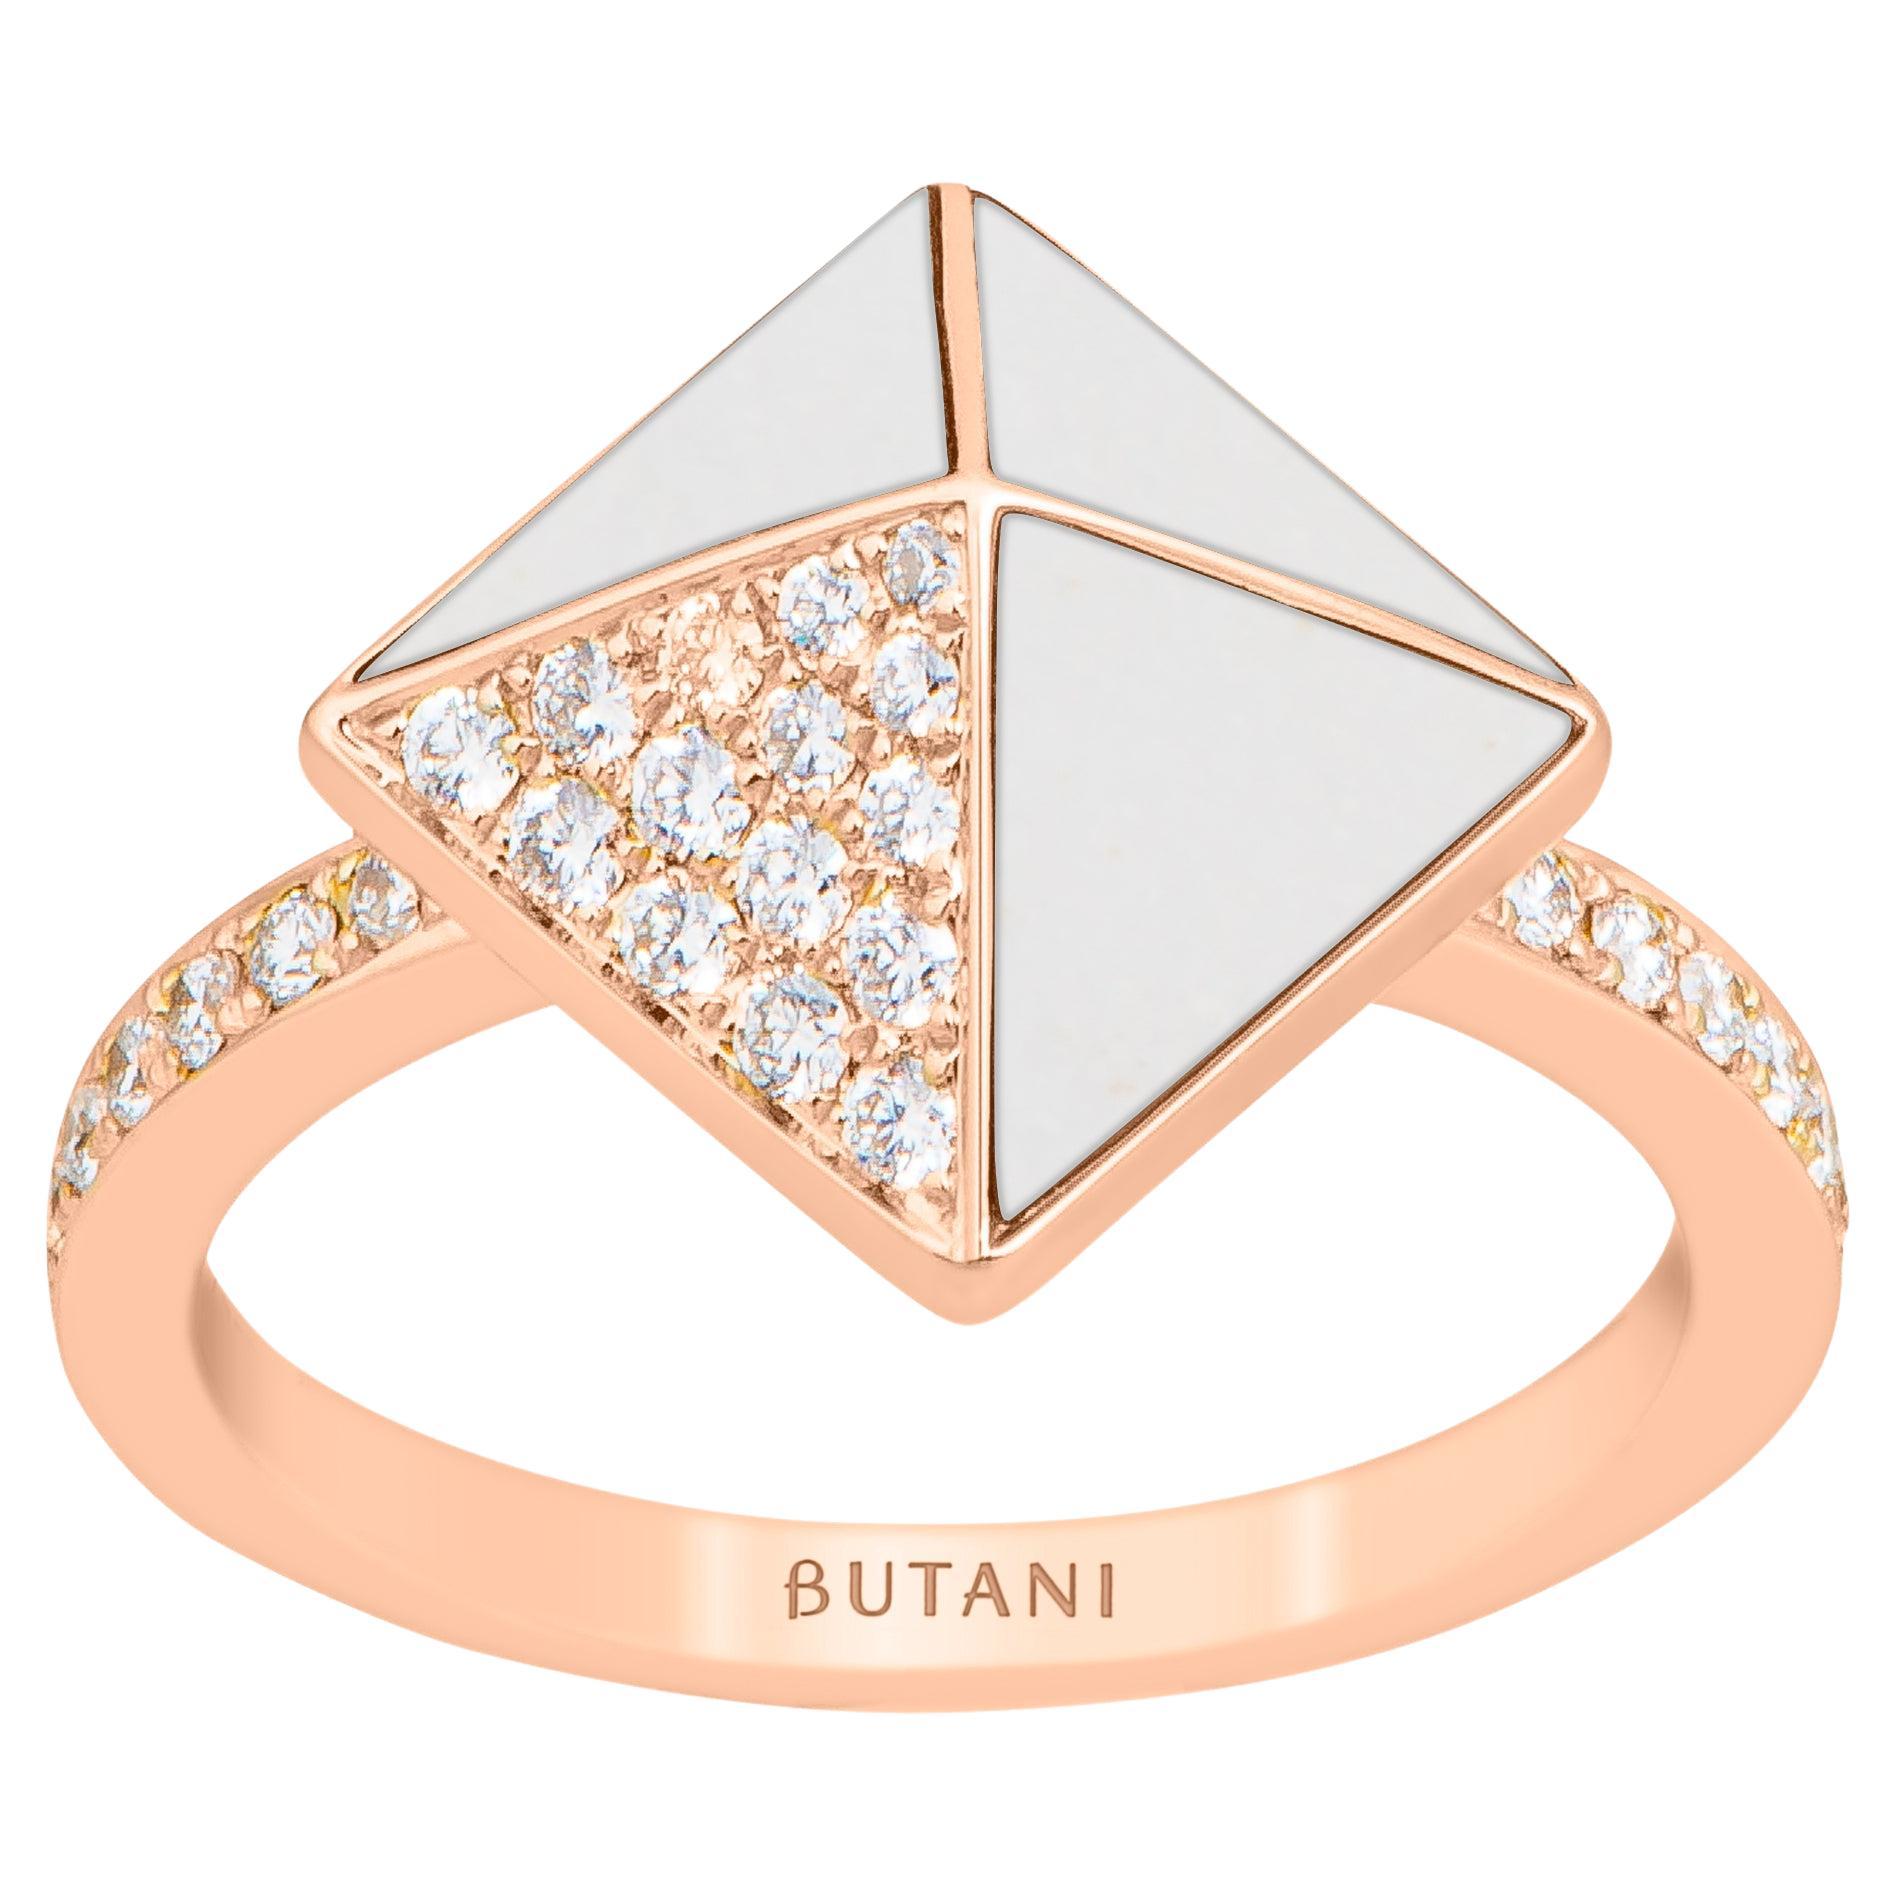 Tetra Apex Ring with White Agate and Diamonds in 18k Rose Gold